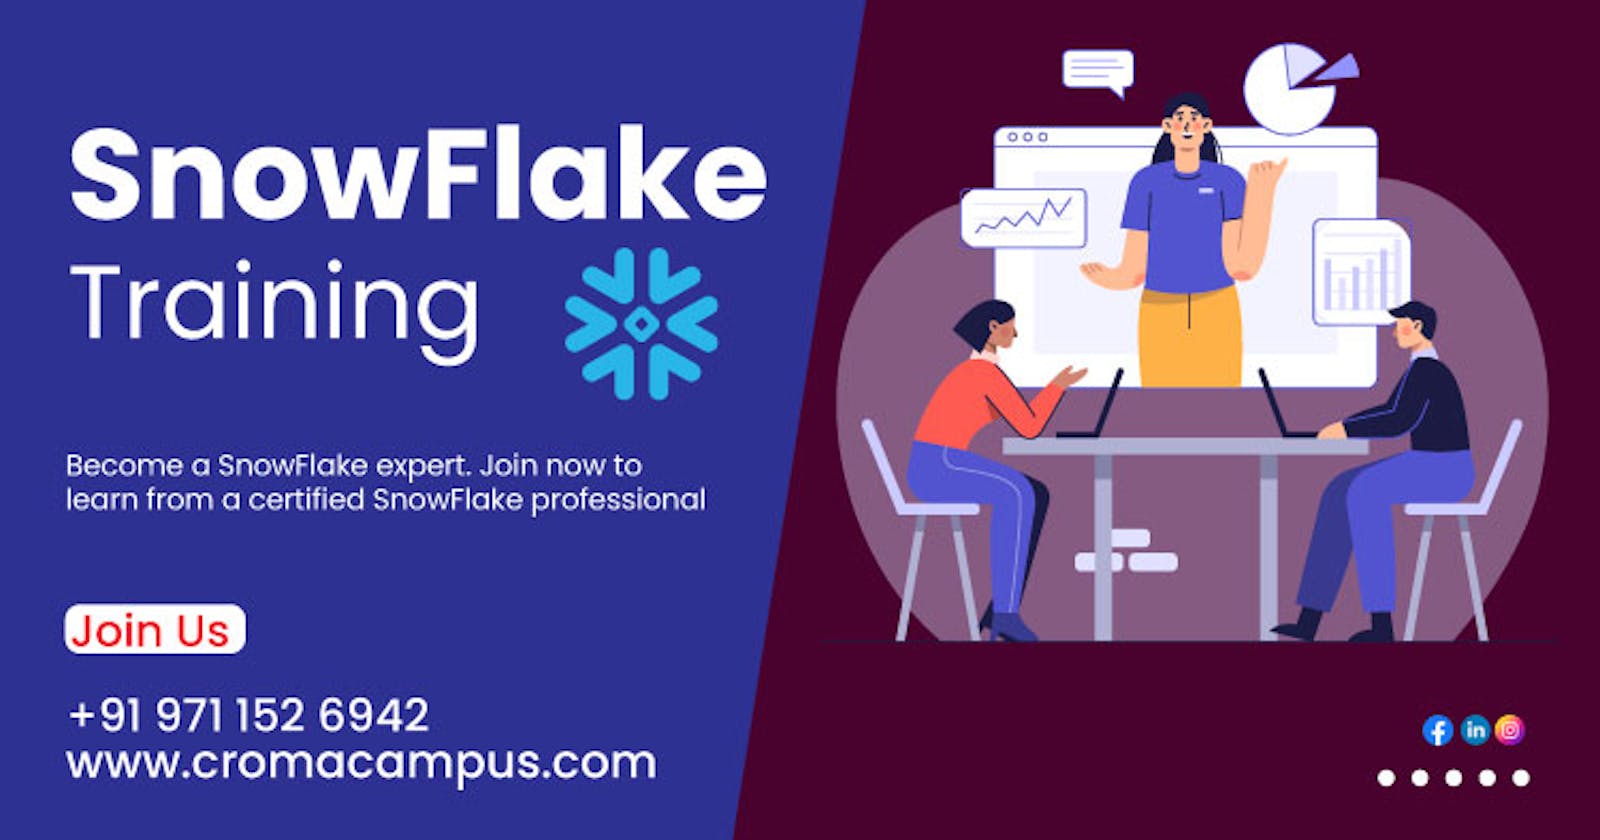 Best Practices For SnowFlake